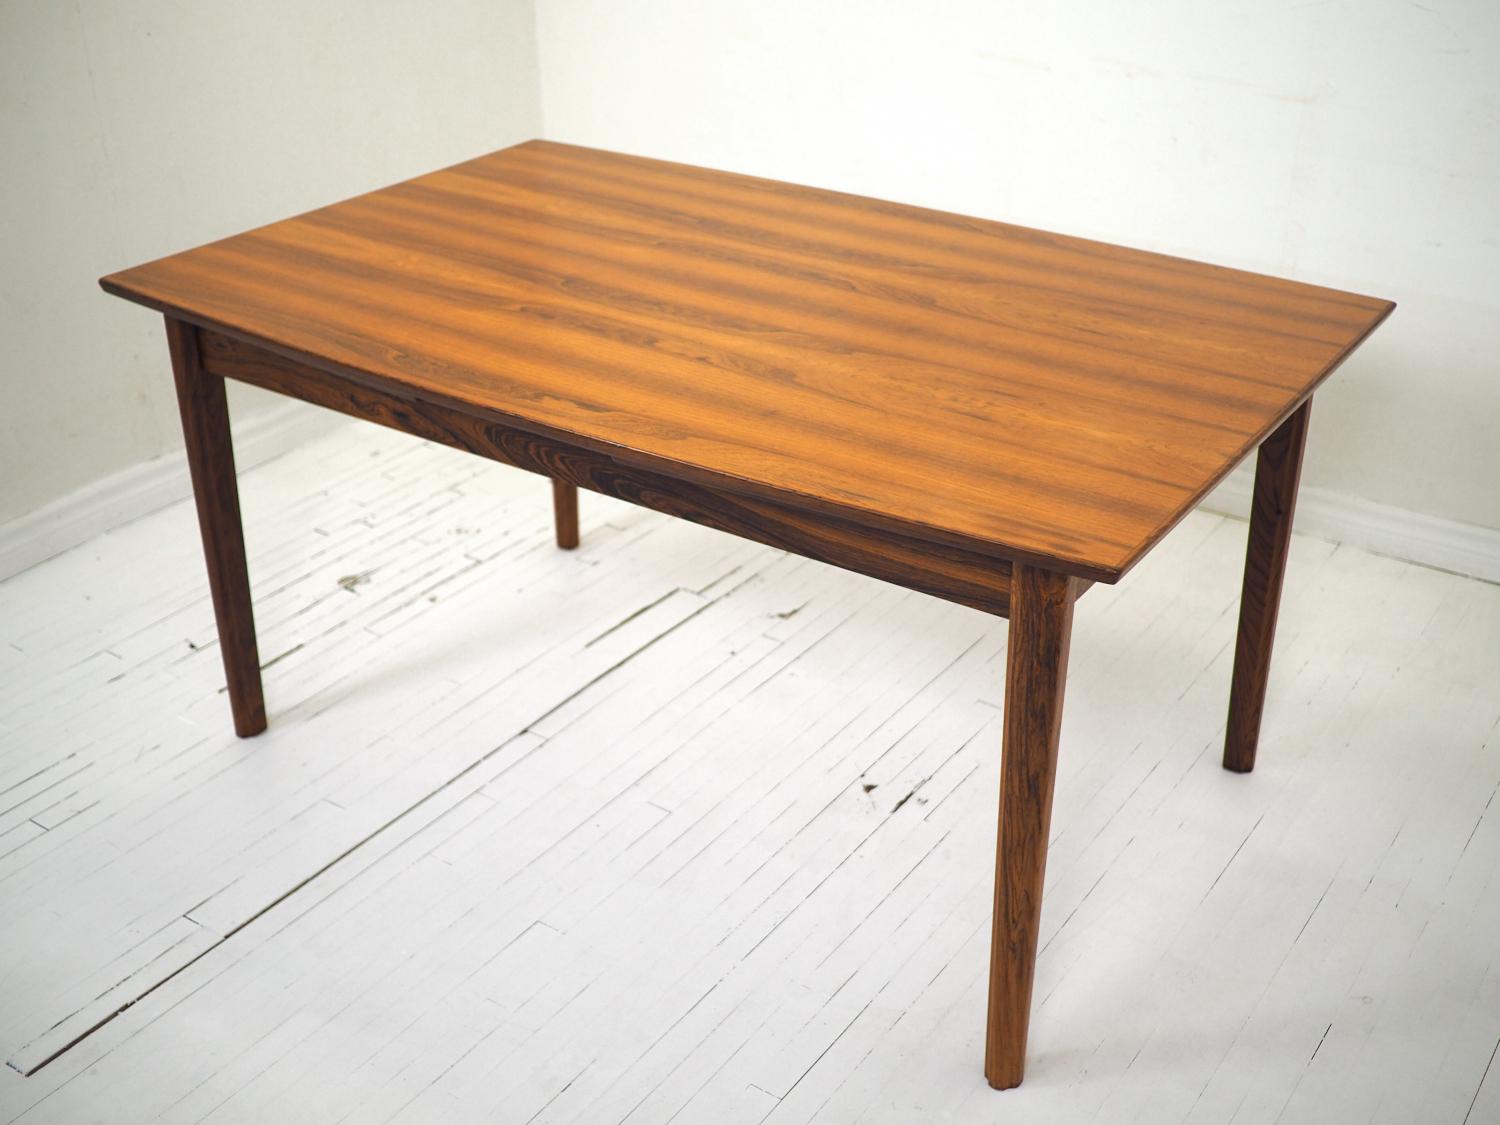 Beautiful early Dyrlund dining table in rosewood, made in Denmark circa 1960's. Makers stamp present on underside. 

Exceptional condition. Rock solid joinery, no signs of damage or repairs. Even the finish is in immaculate condition for the age -